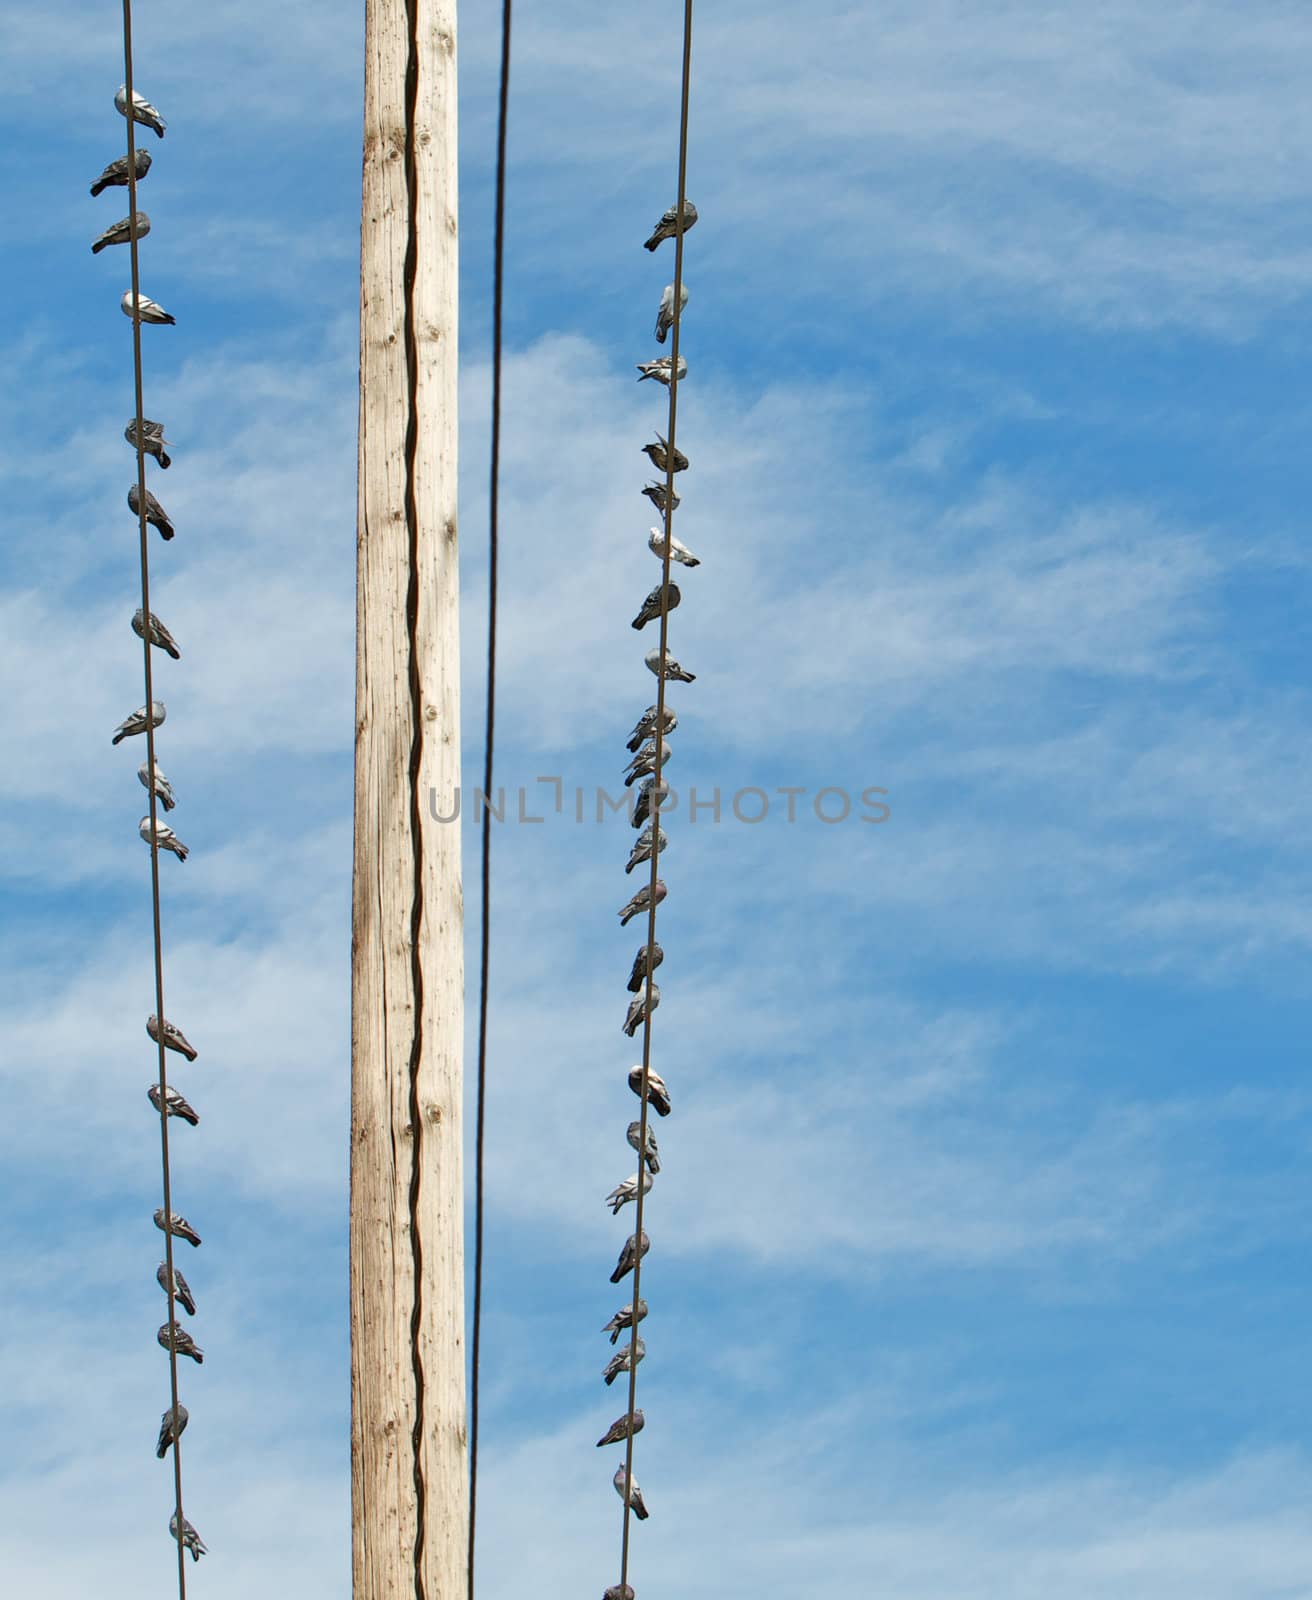 Pigeons on Power lines distant by bobkeenan